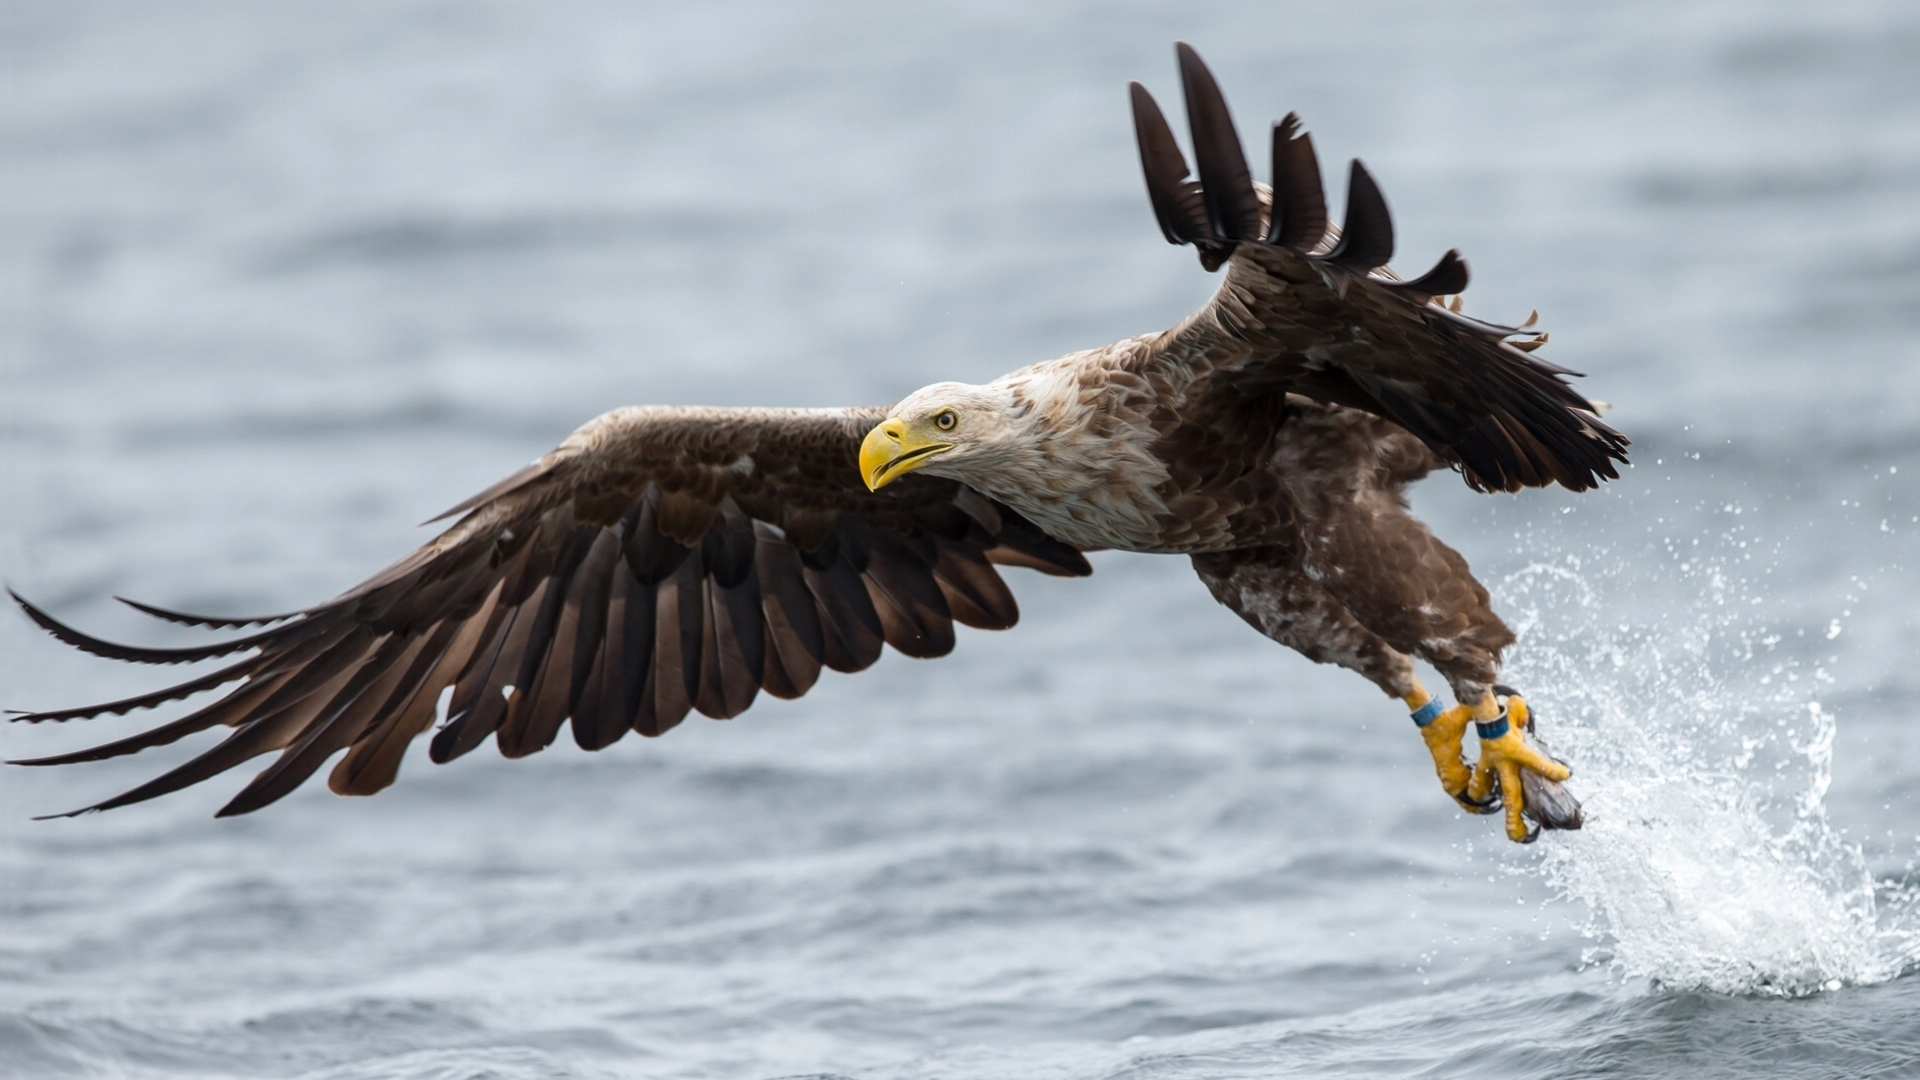 eagle, animal, white tailed eagle, bird, water, wings, birds